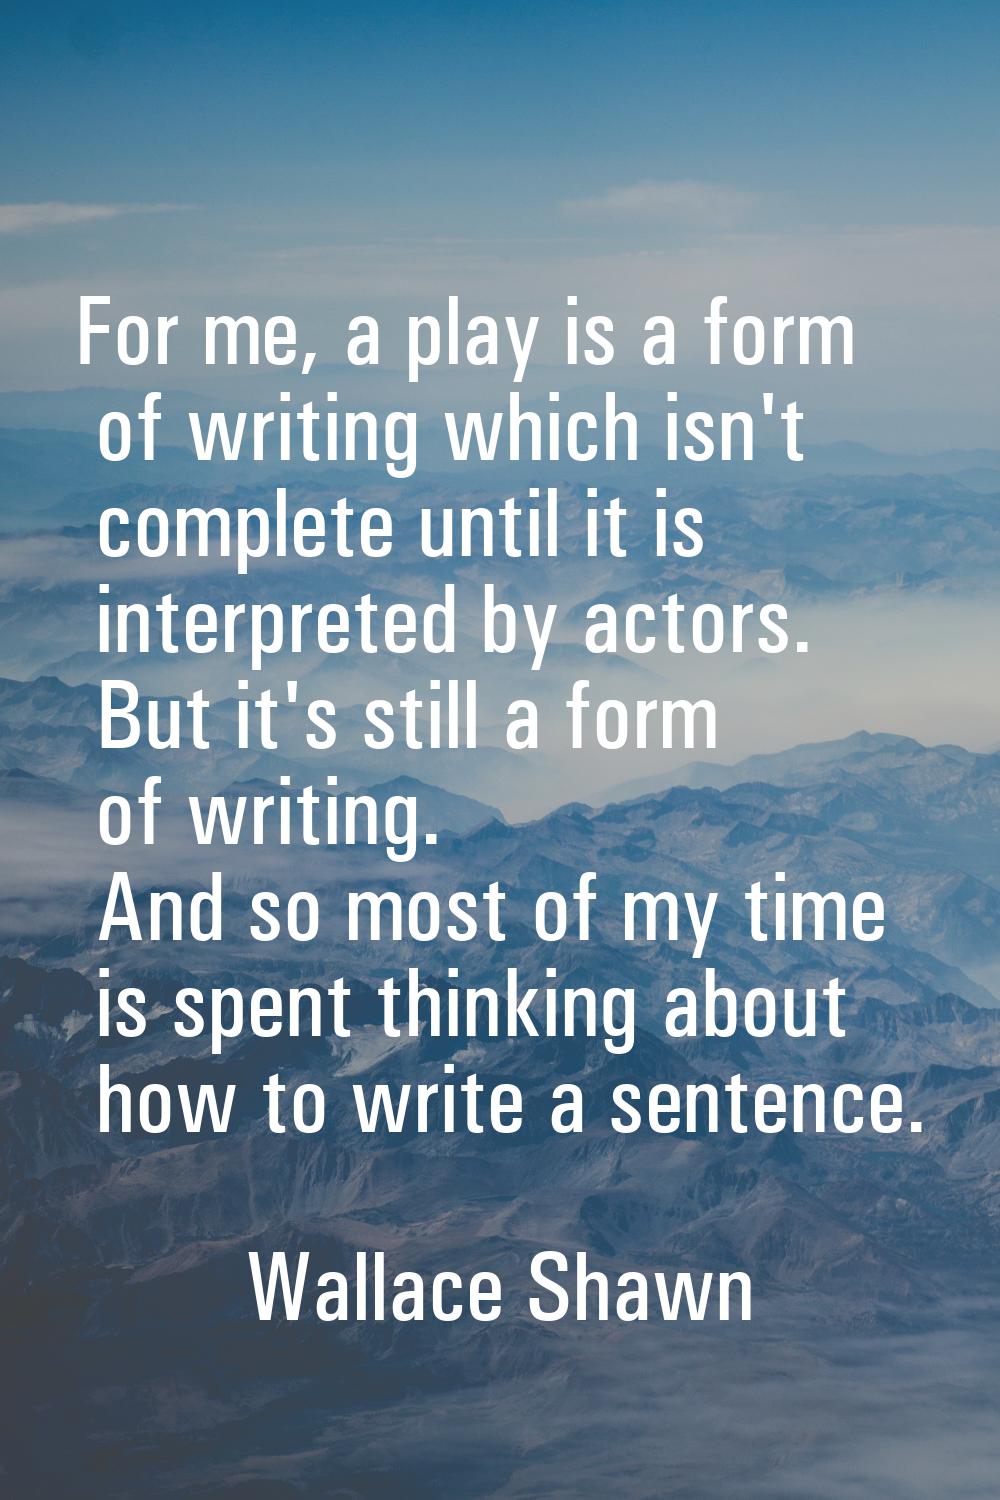 For me, a play is a form of writing which isn't complete until it is interpreted by actors. But it'